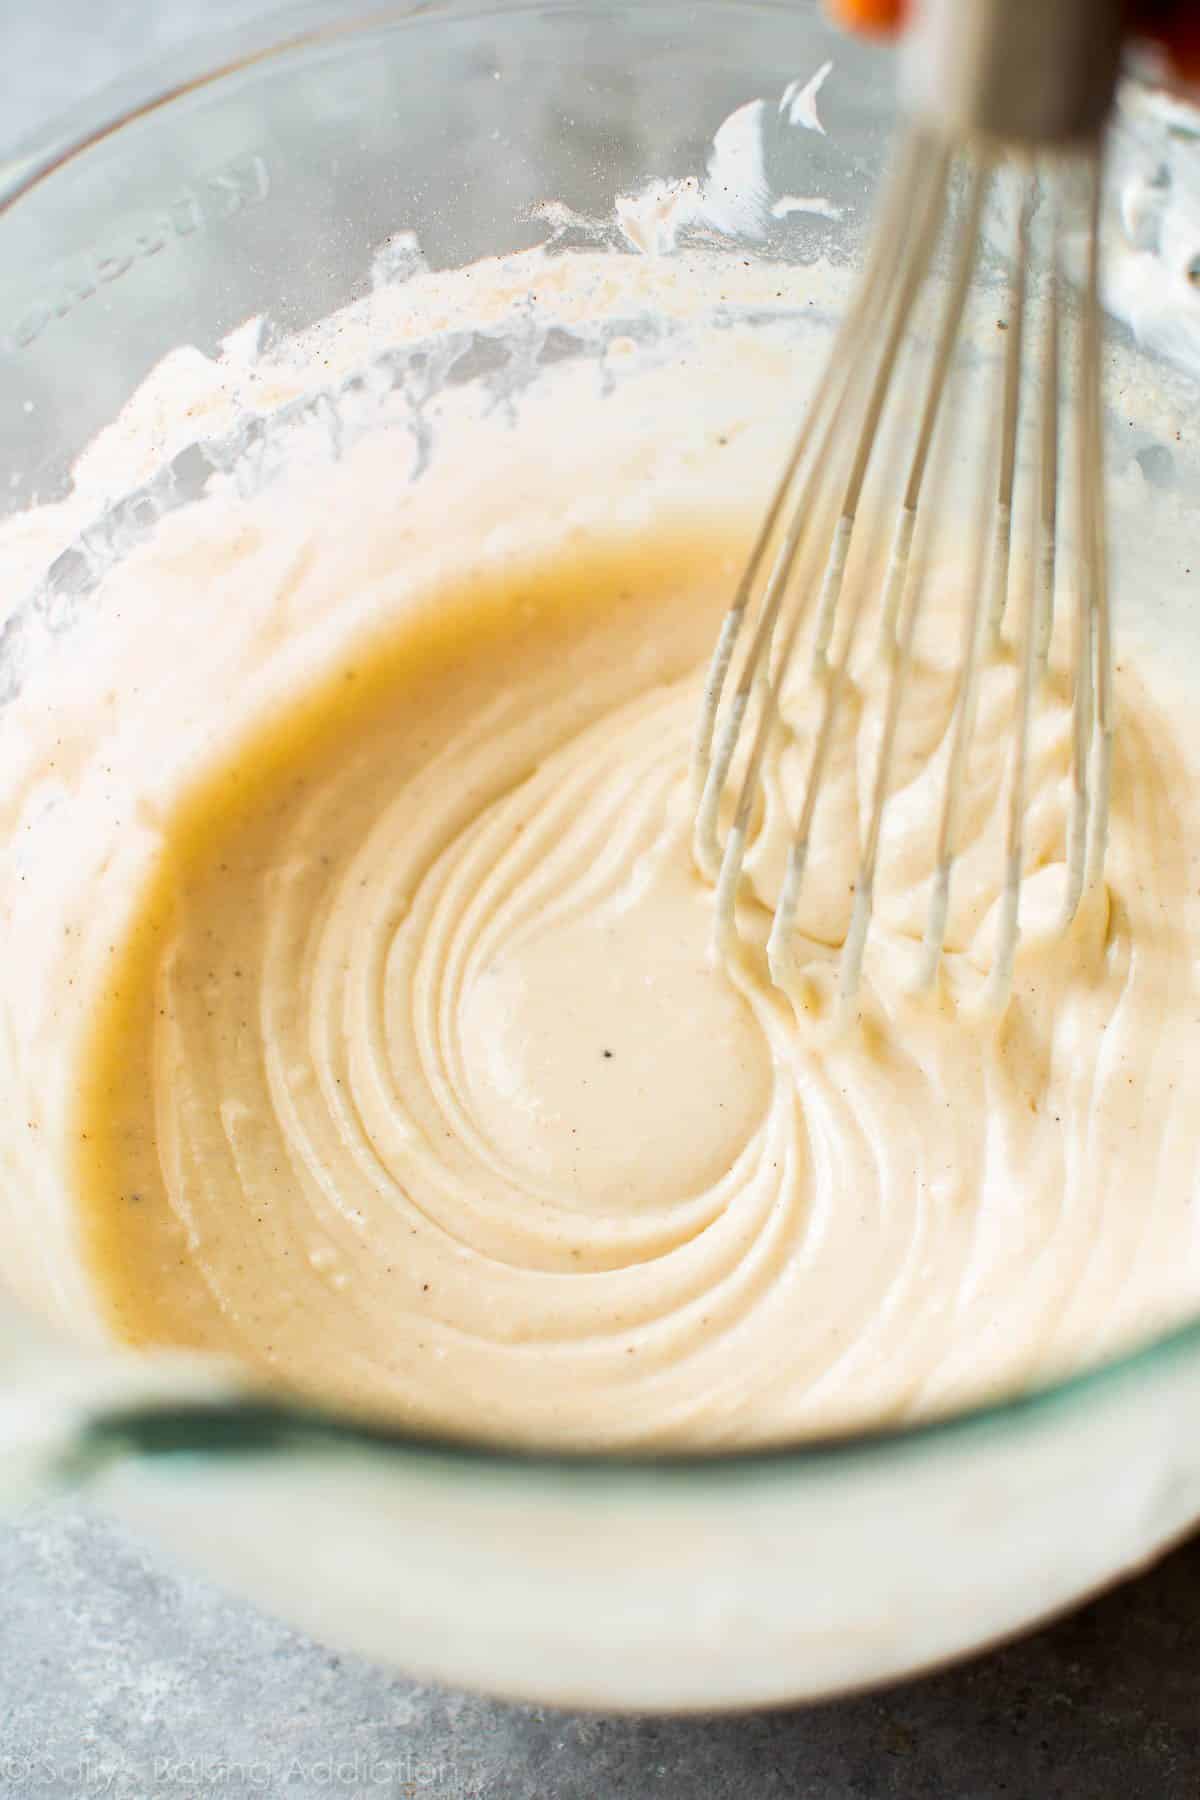 cupcake batter in a glass bowl with a metal whisk.